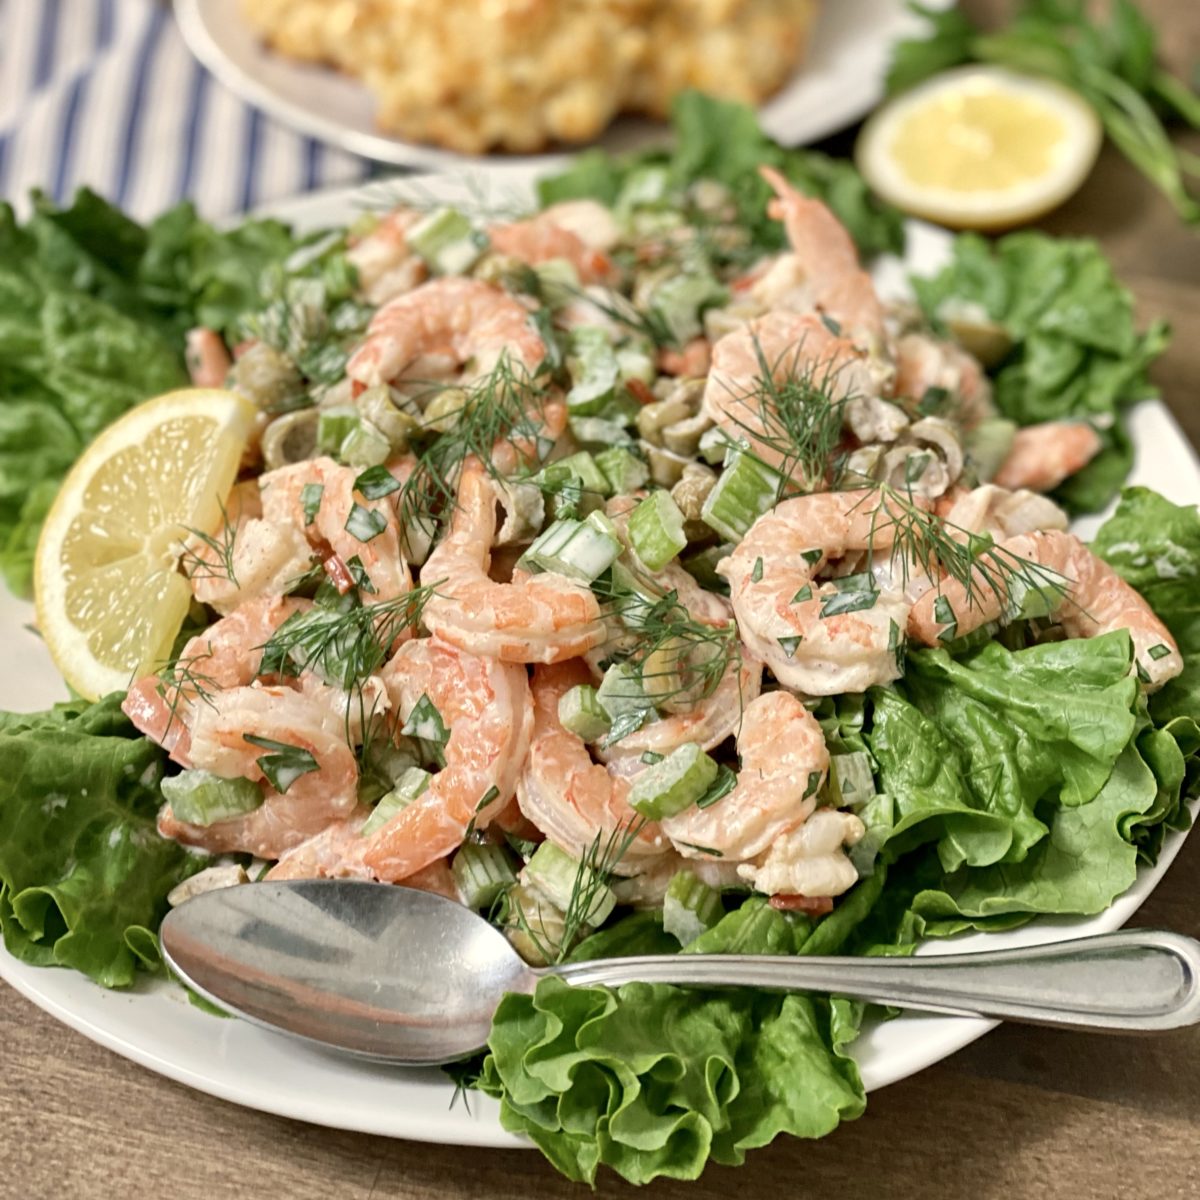 The best shrimp salad on a bed of lettuce with a lemon wedge.